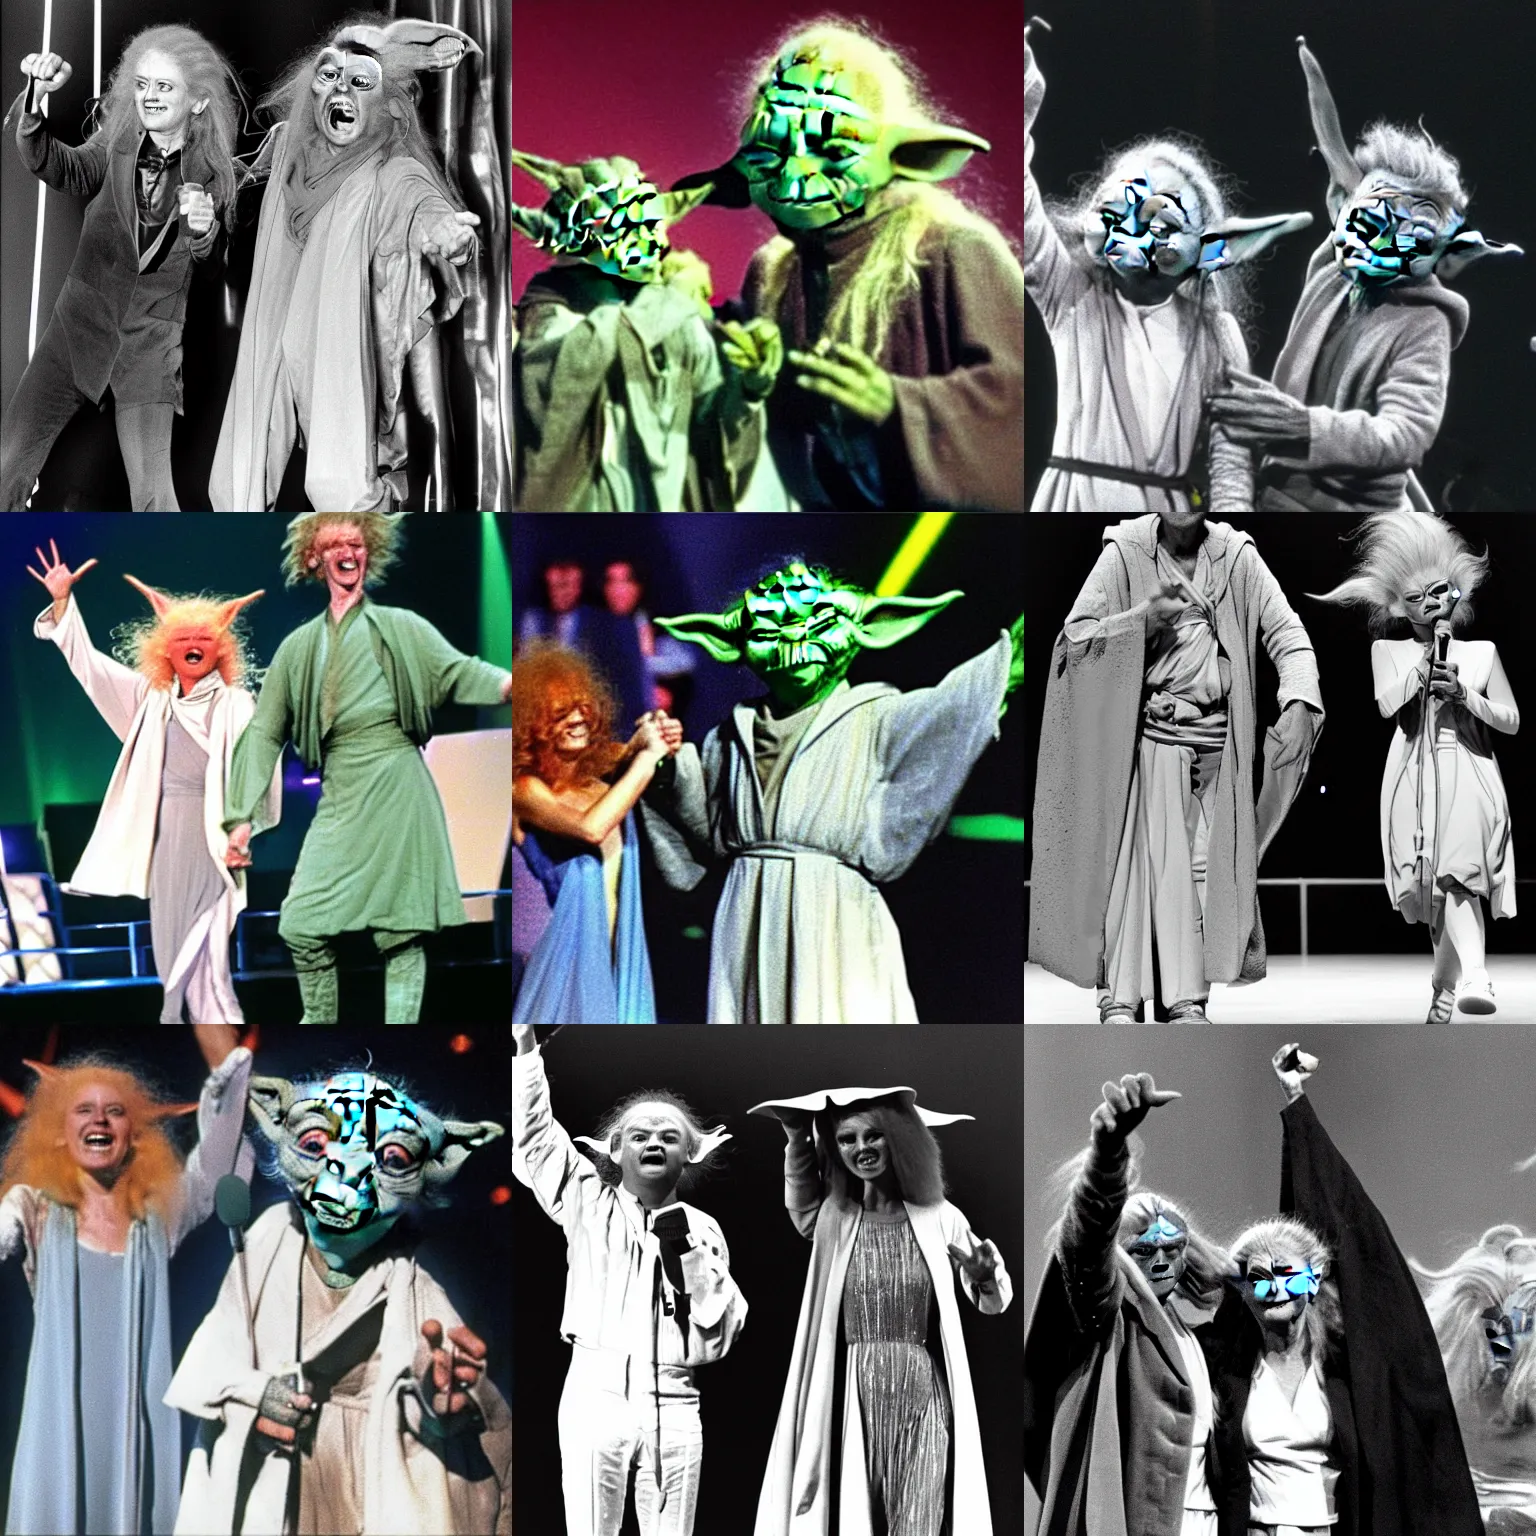 Prompt: photo of yoda and yaddle winning the eurovision song contest and celebrating on stage in the 80s